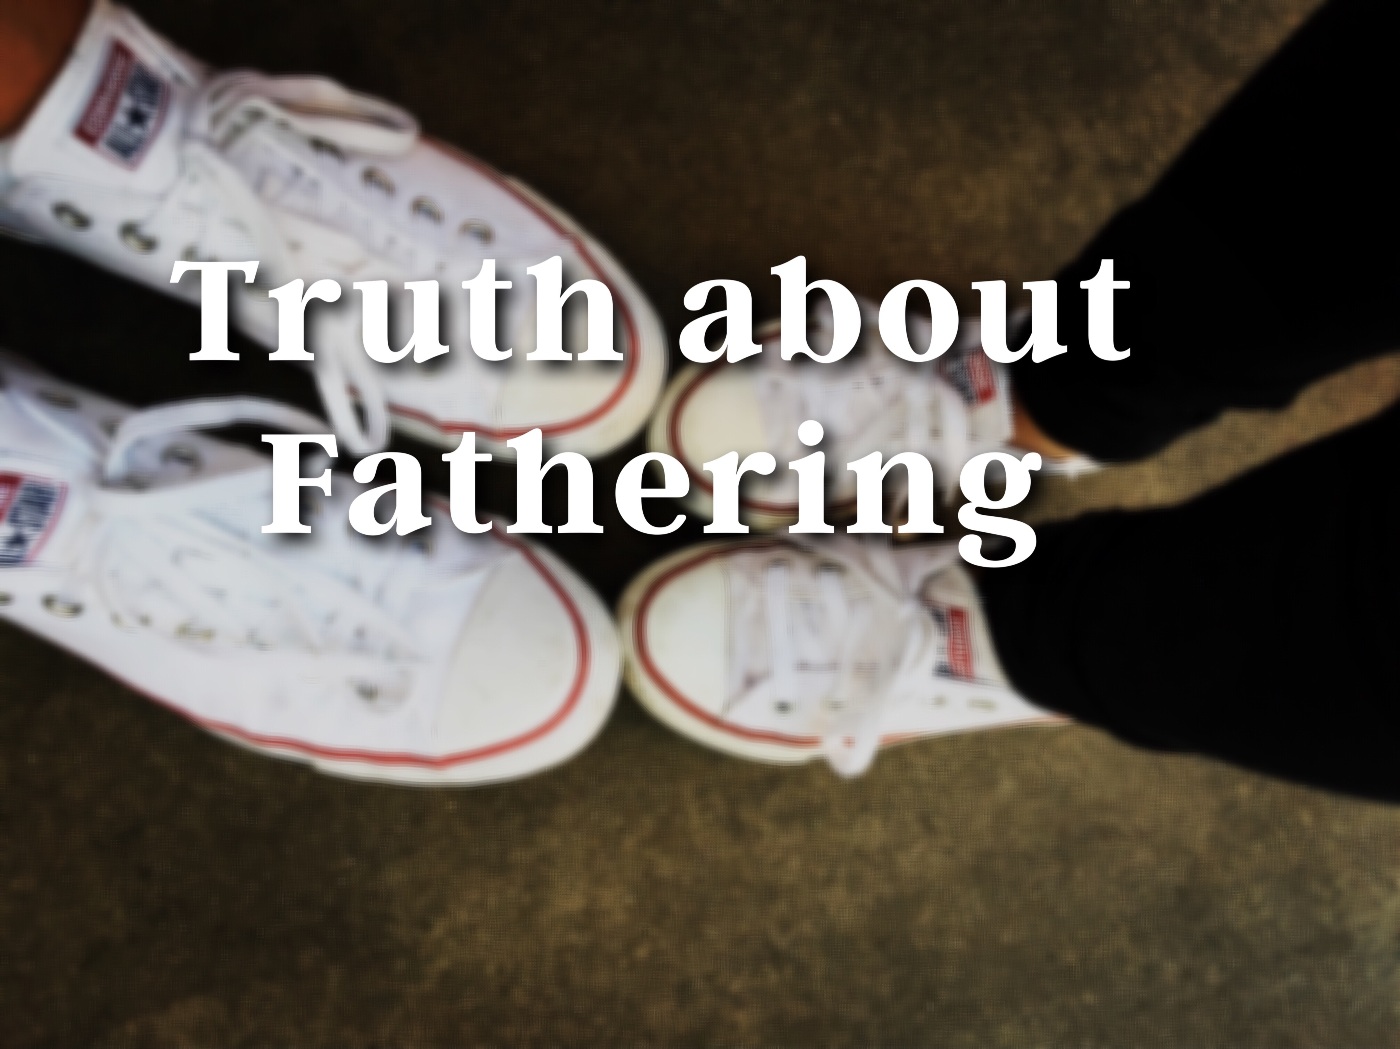 Truth About Fathering, Podcast about fathering and how God fathers us.